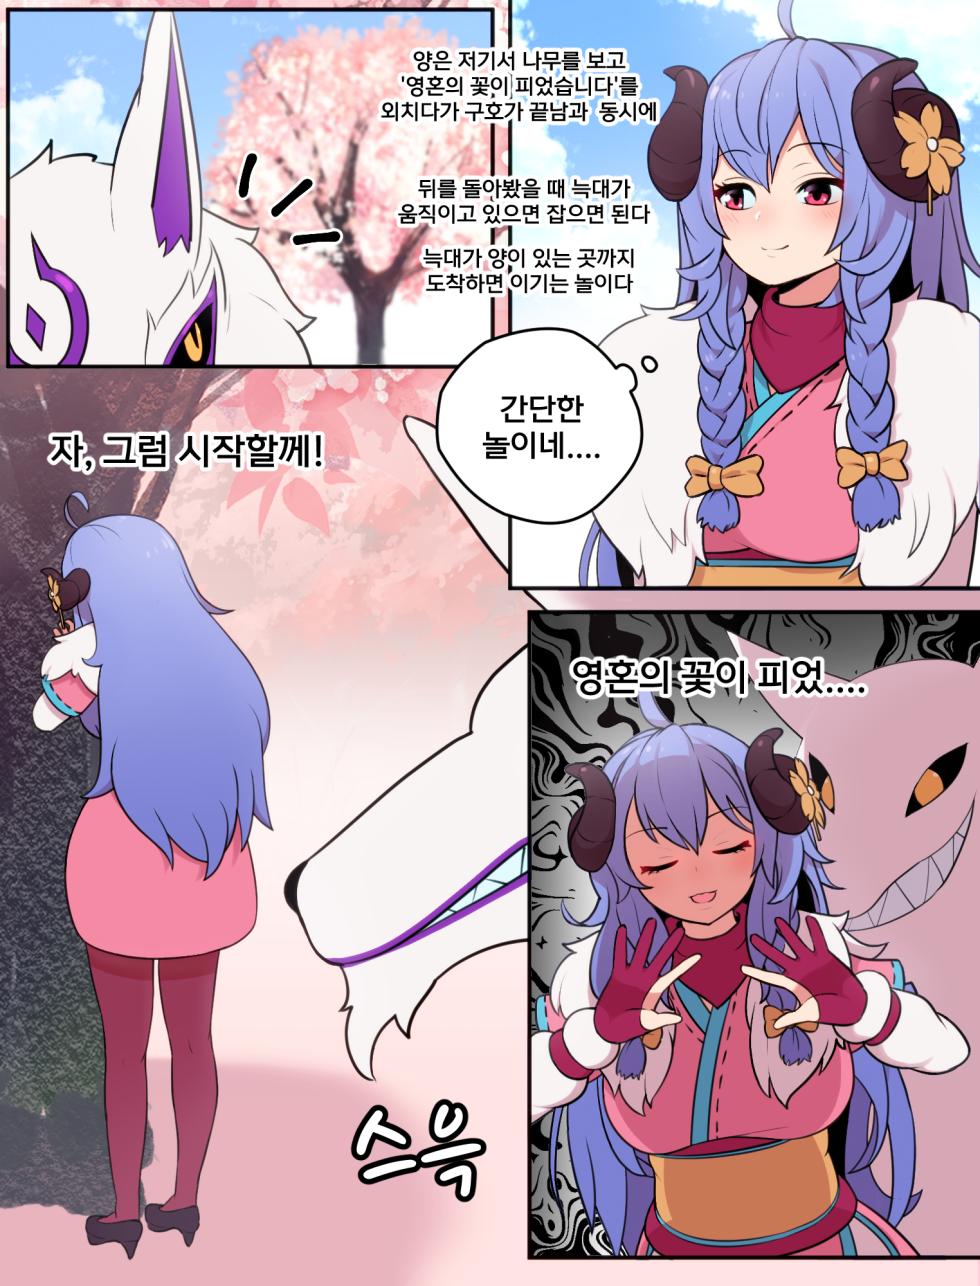 [Everyday2] The Soul Flower Has Bloomed! (League of Legends) - Page 3